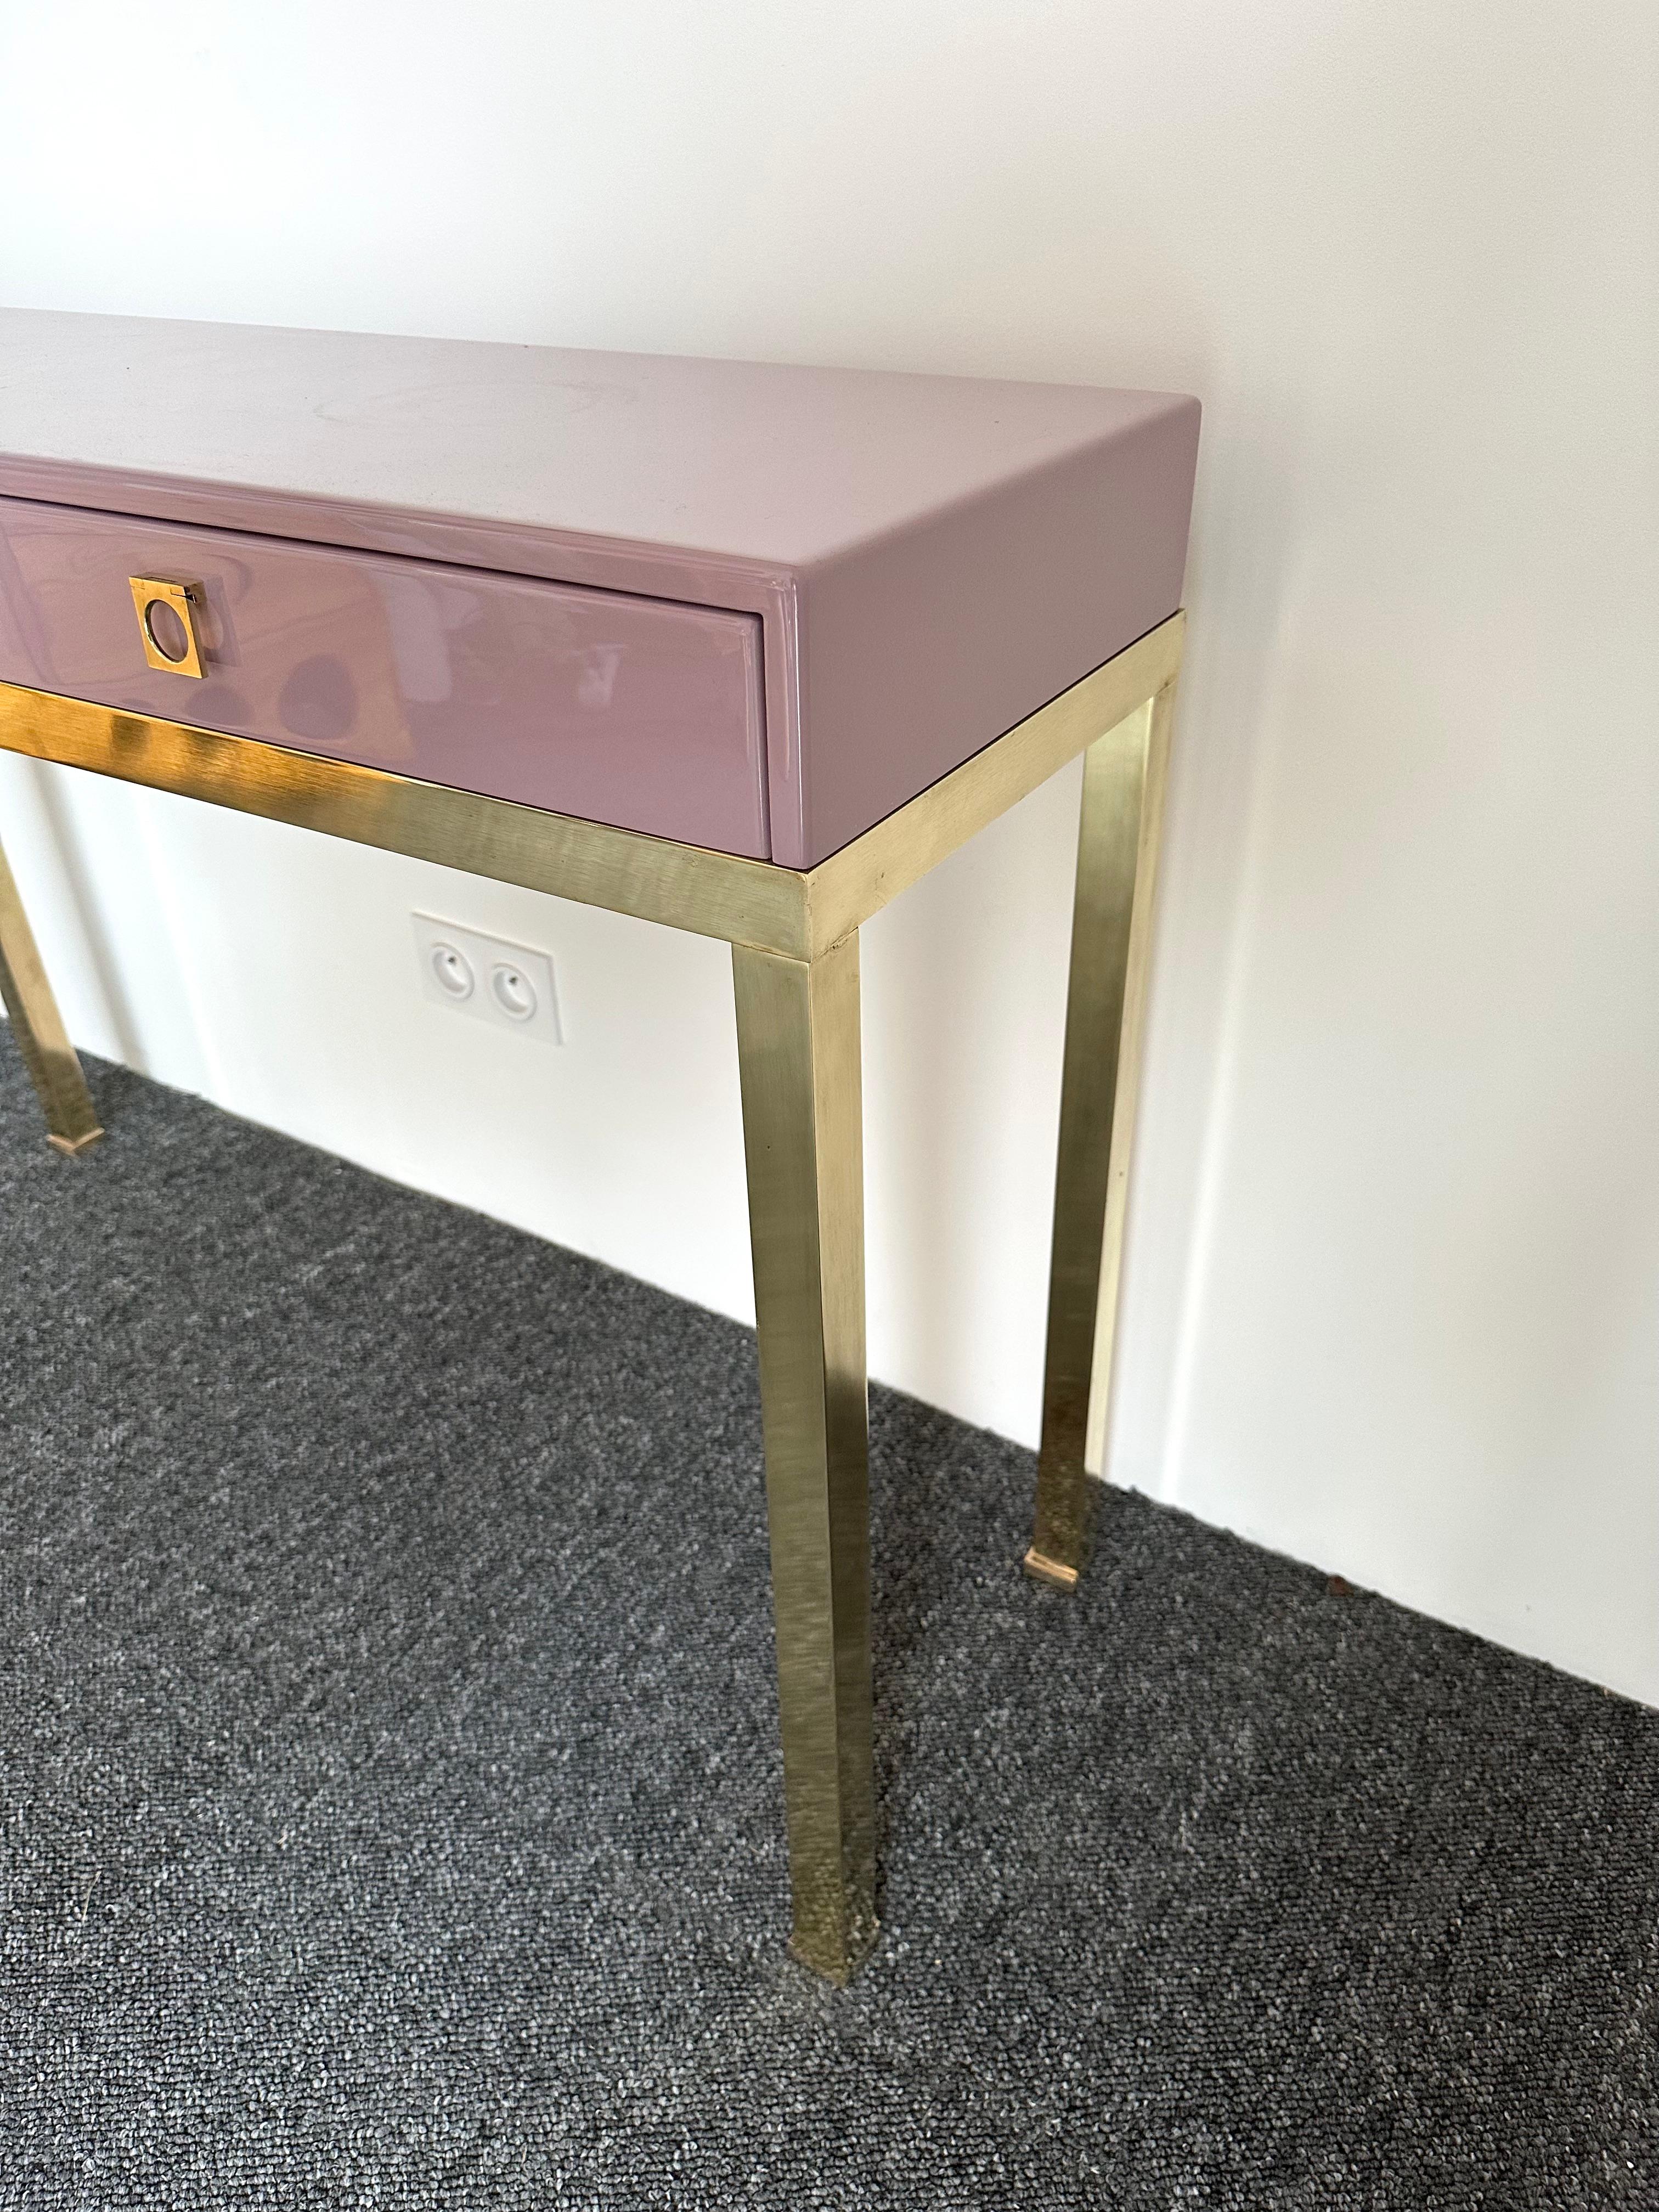 Mid-Century Modern Space Age Hollywood Regency parma light purple pink lacquered console table with wood interior, 2 drawers, brass feet and handle by the french designer Guy Lefevre. Famous manufacture like Maison Jansen, Mahey, Willy Rizzo, Mario